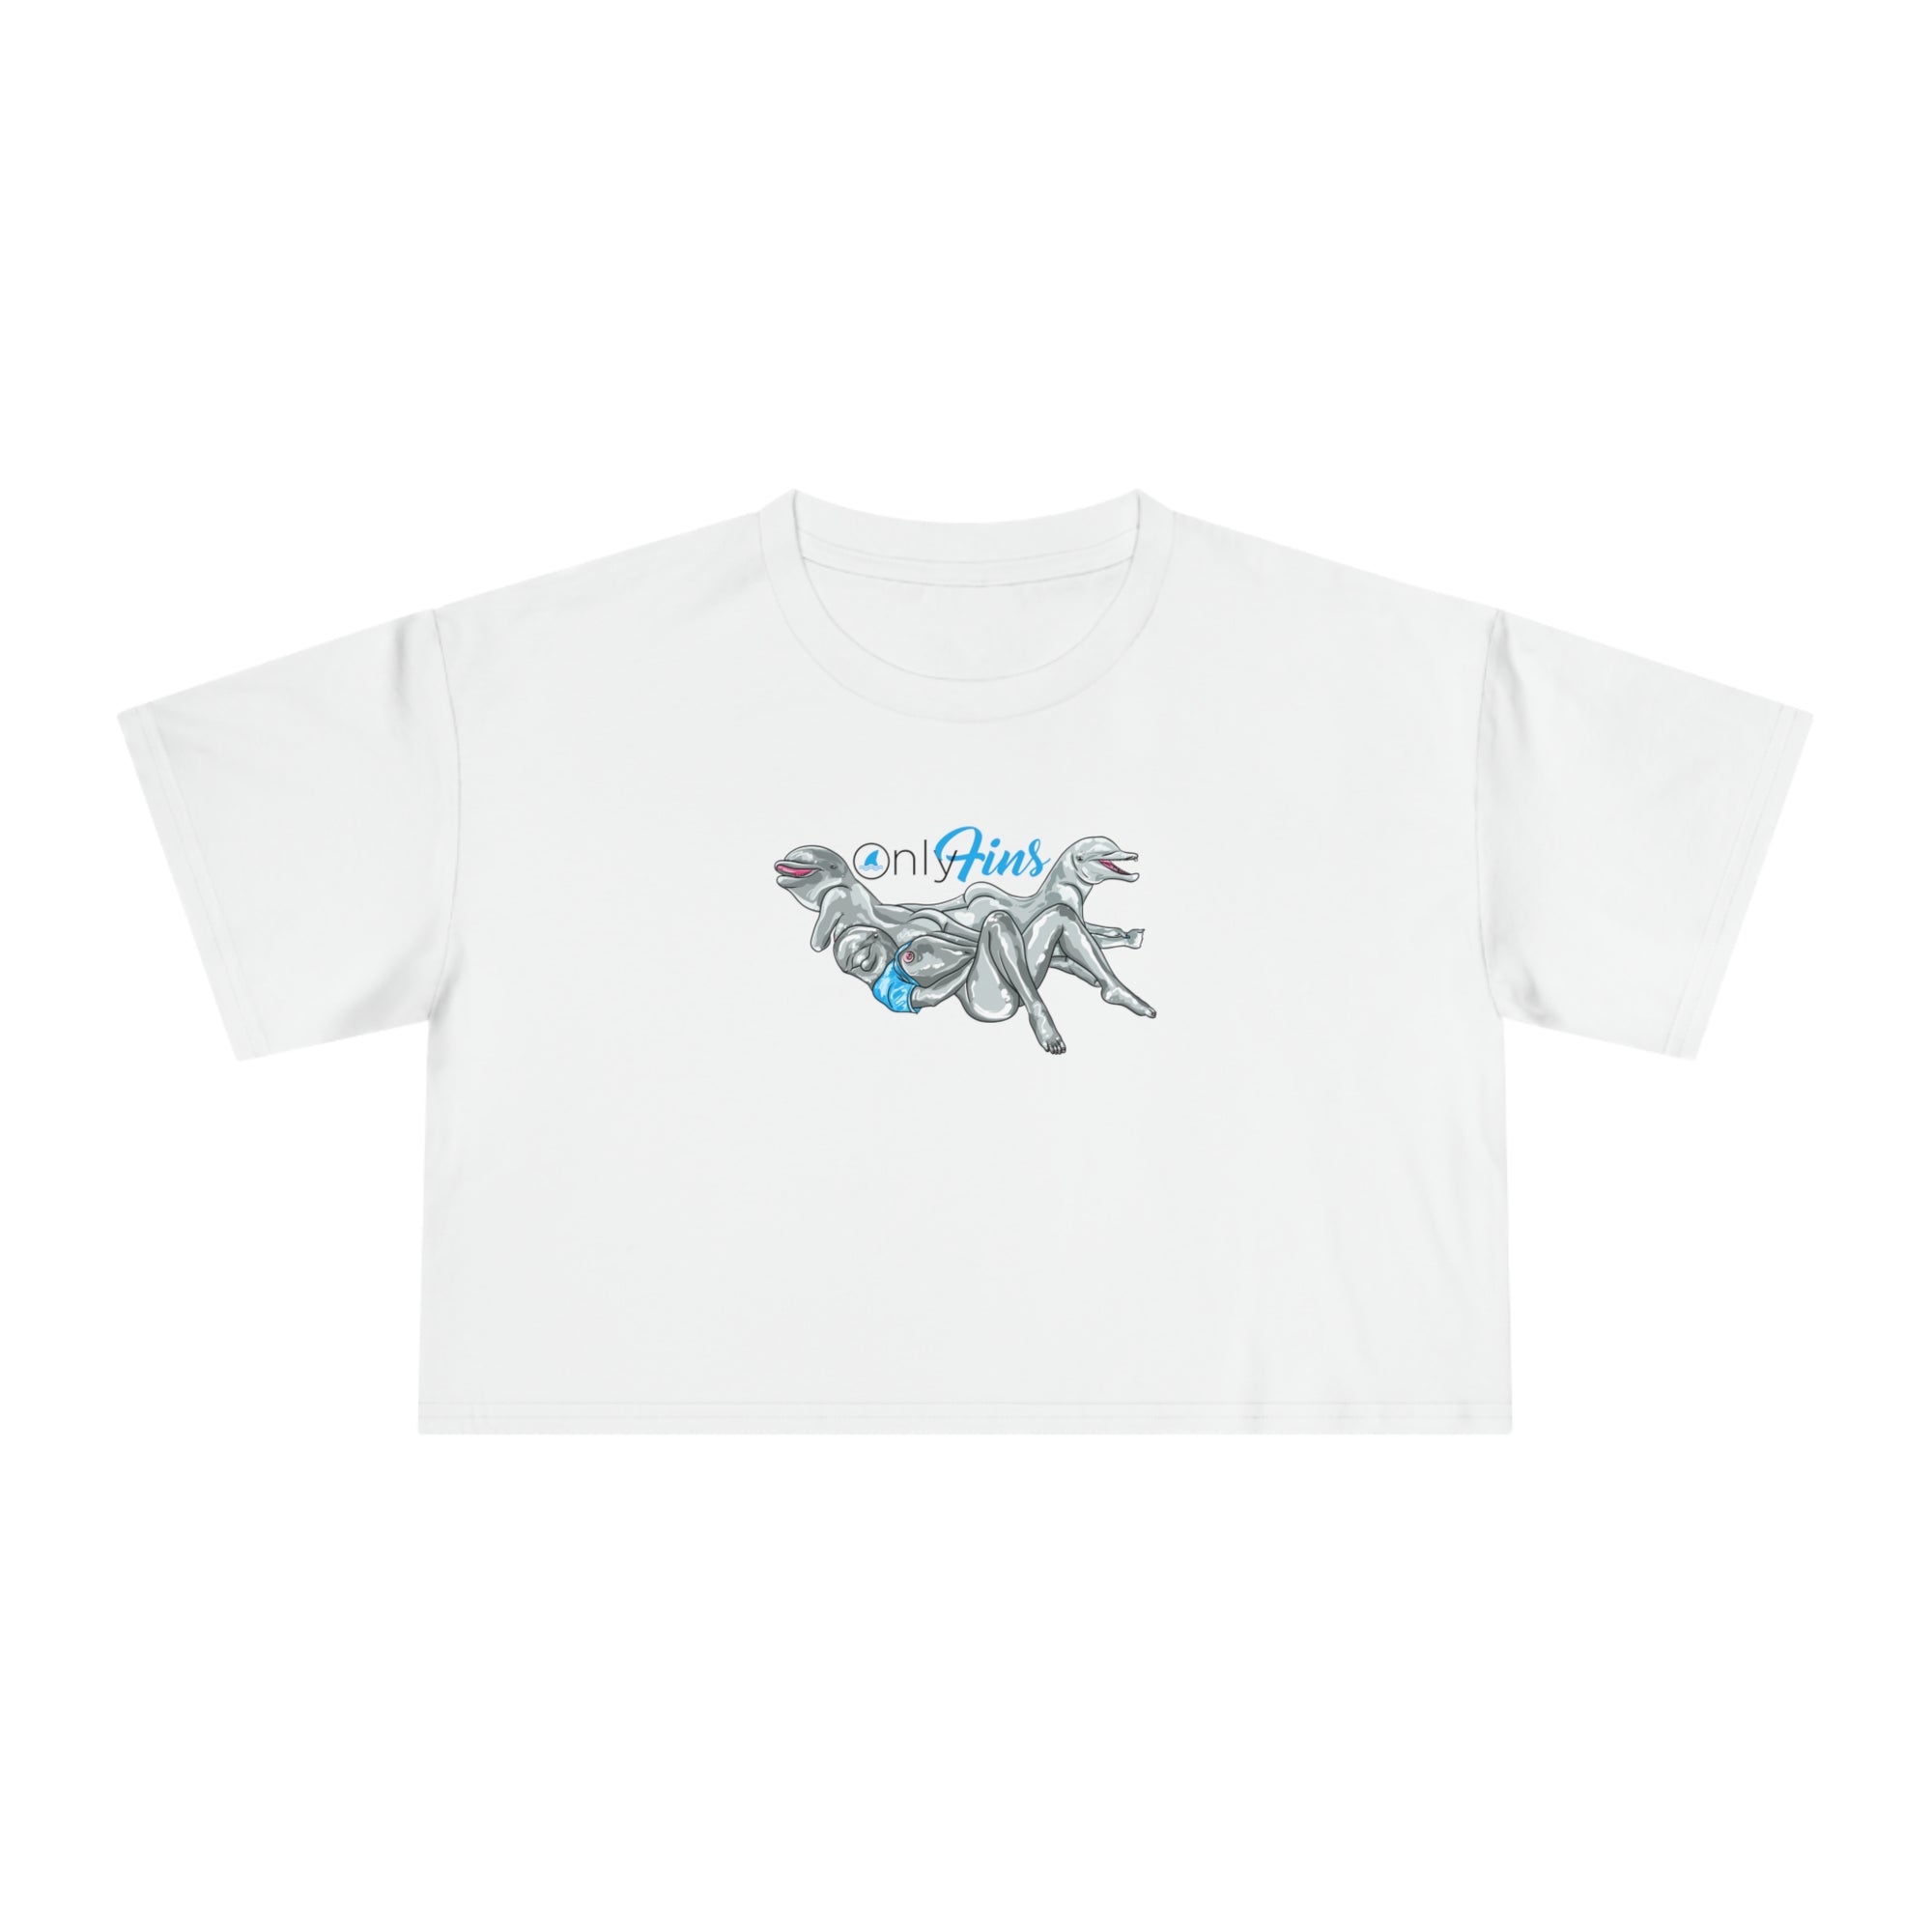 FOLLOW US ON ONLY FINS - Crop Tee